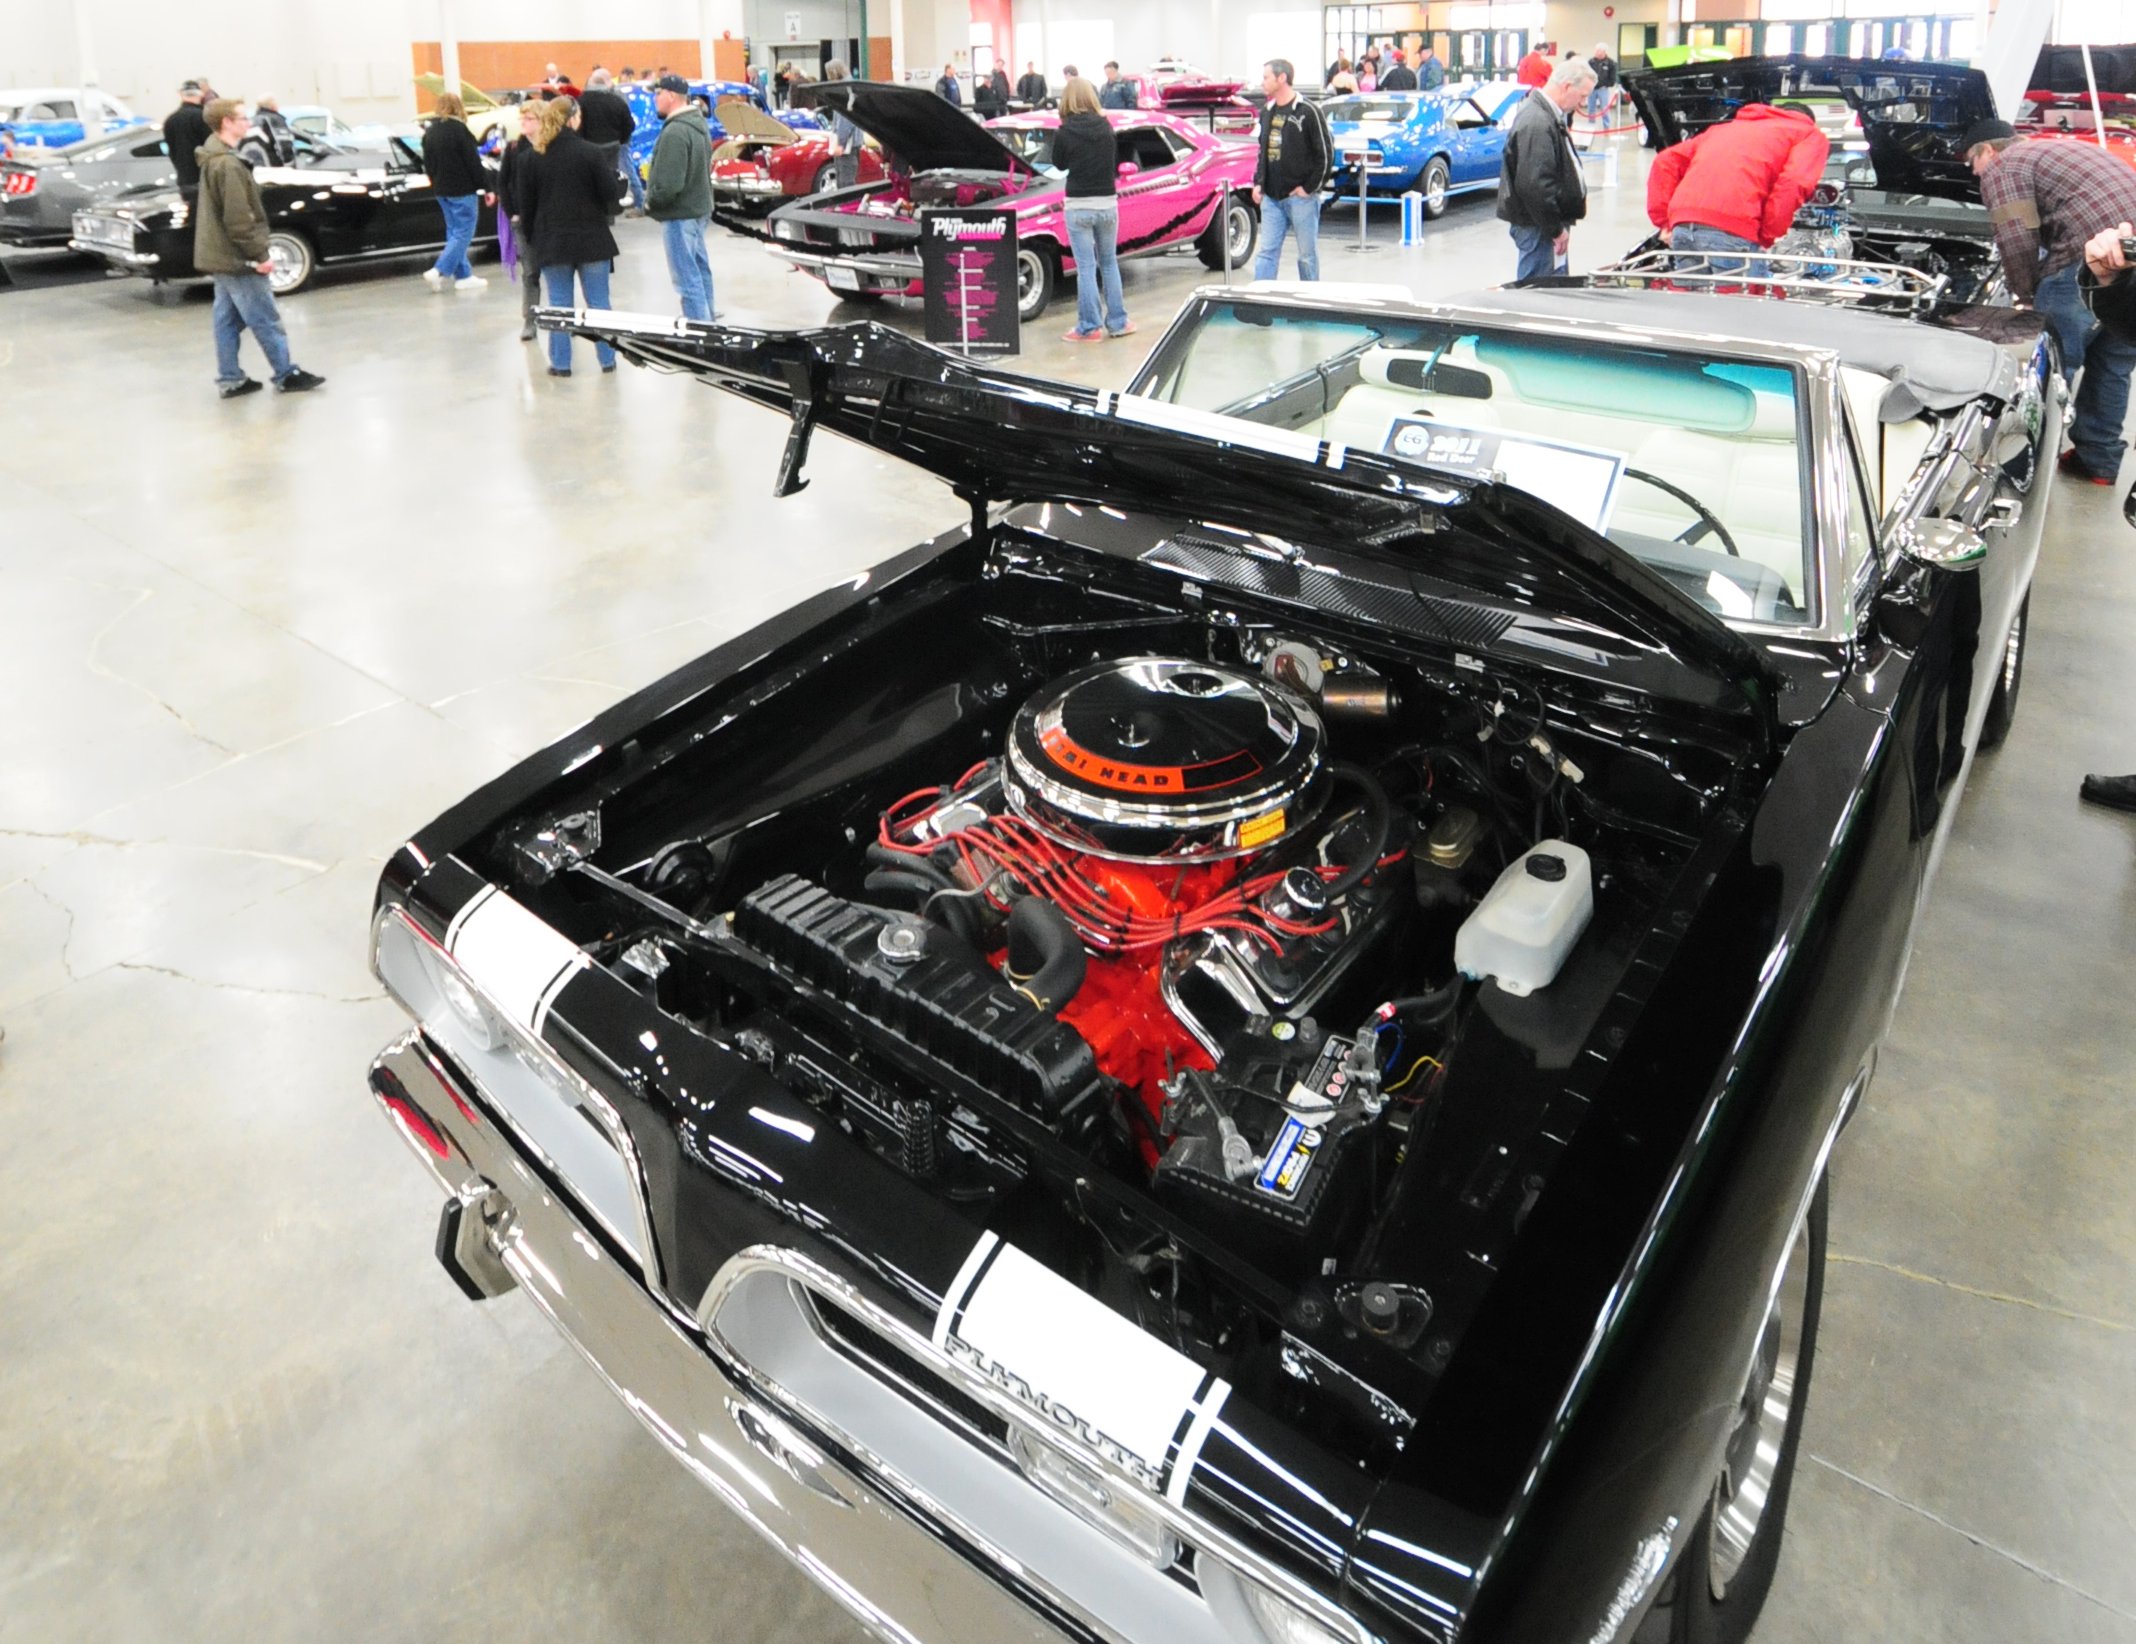 QUEENS- Many amazing vehicles were auctioned off at the Spring Auction and Red Deer Speed and Custom Show this past weekend at the Westerner.